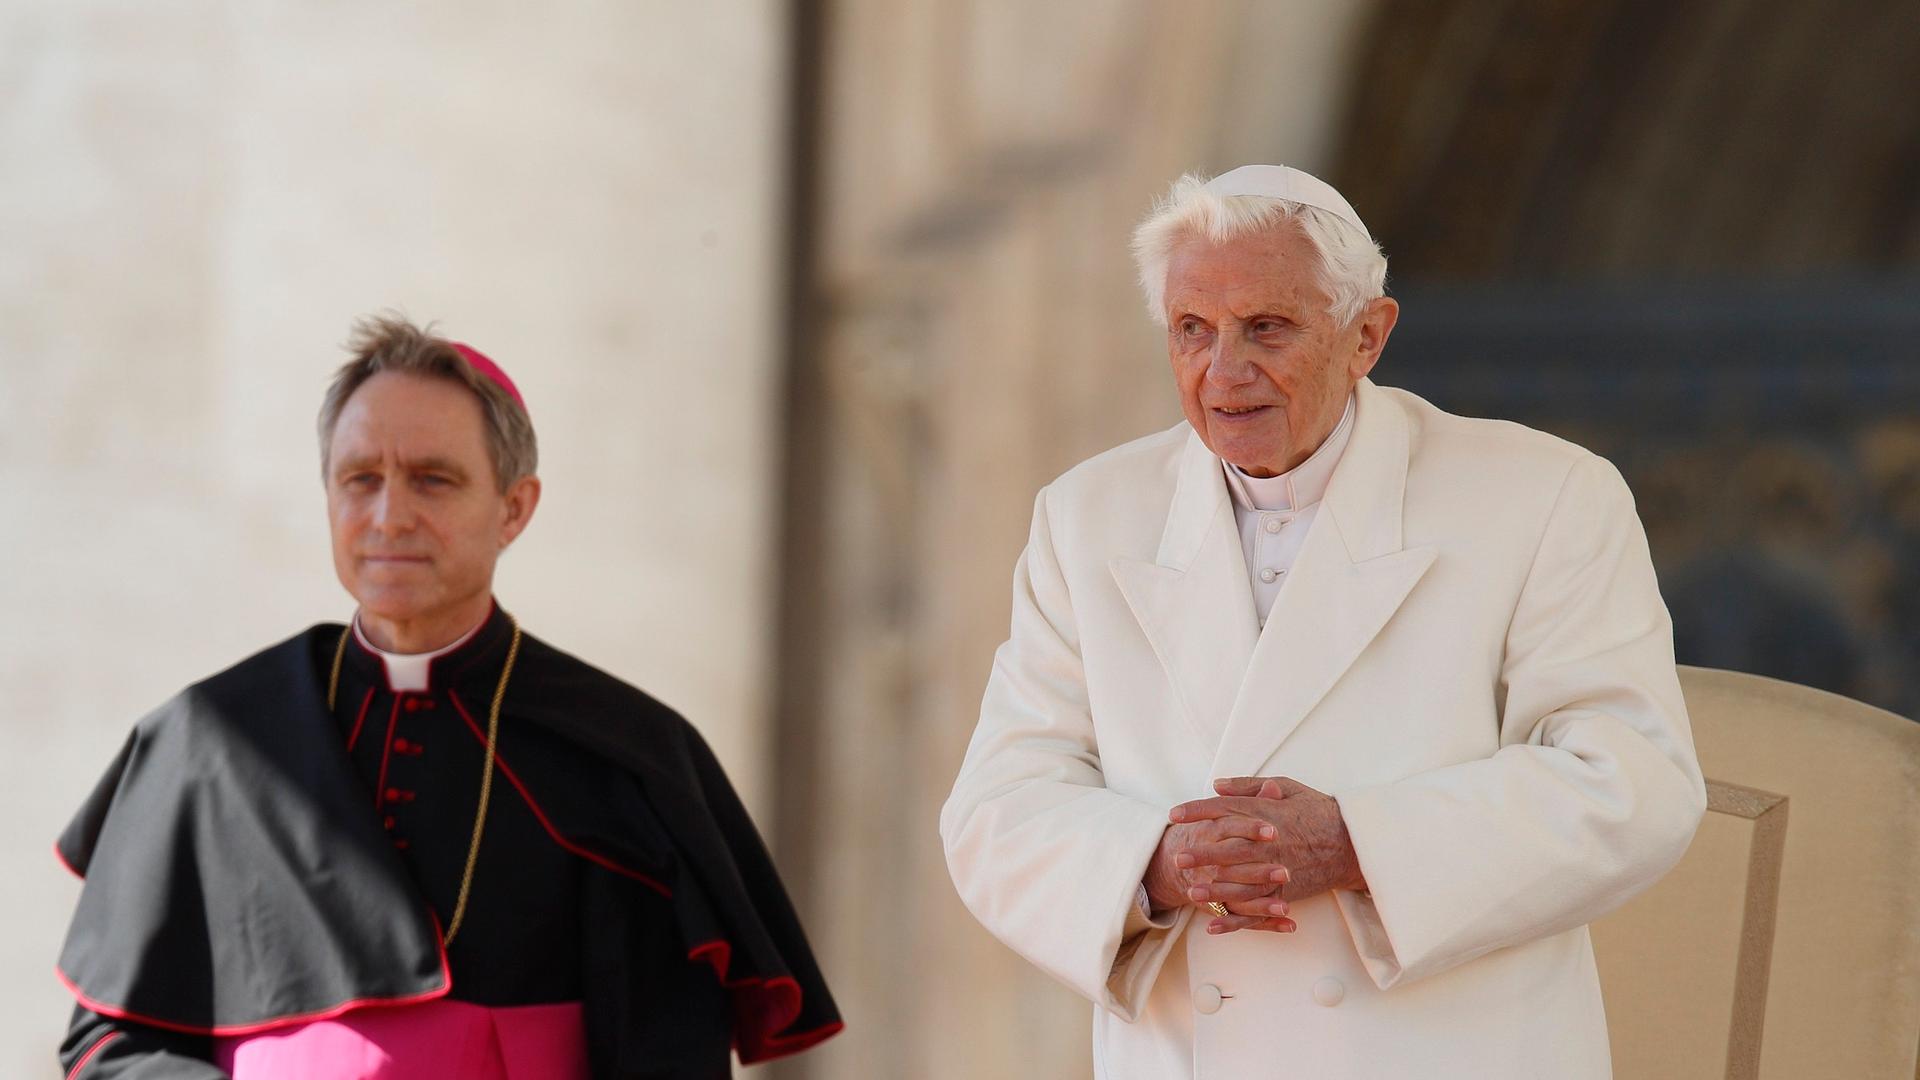 Personal secretary to Benedict XVI says ‘the devil worked against him’